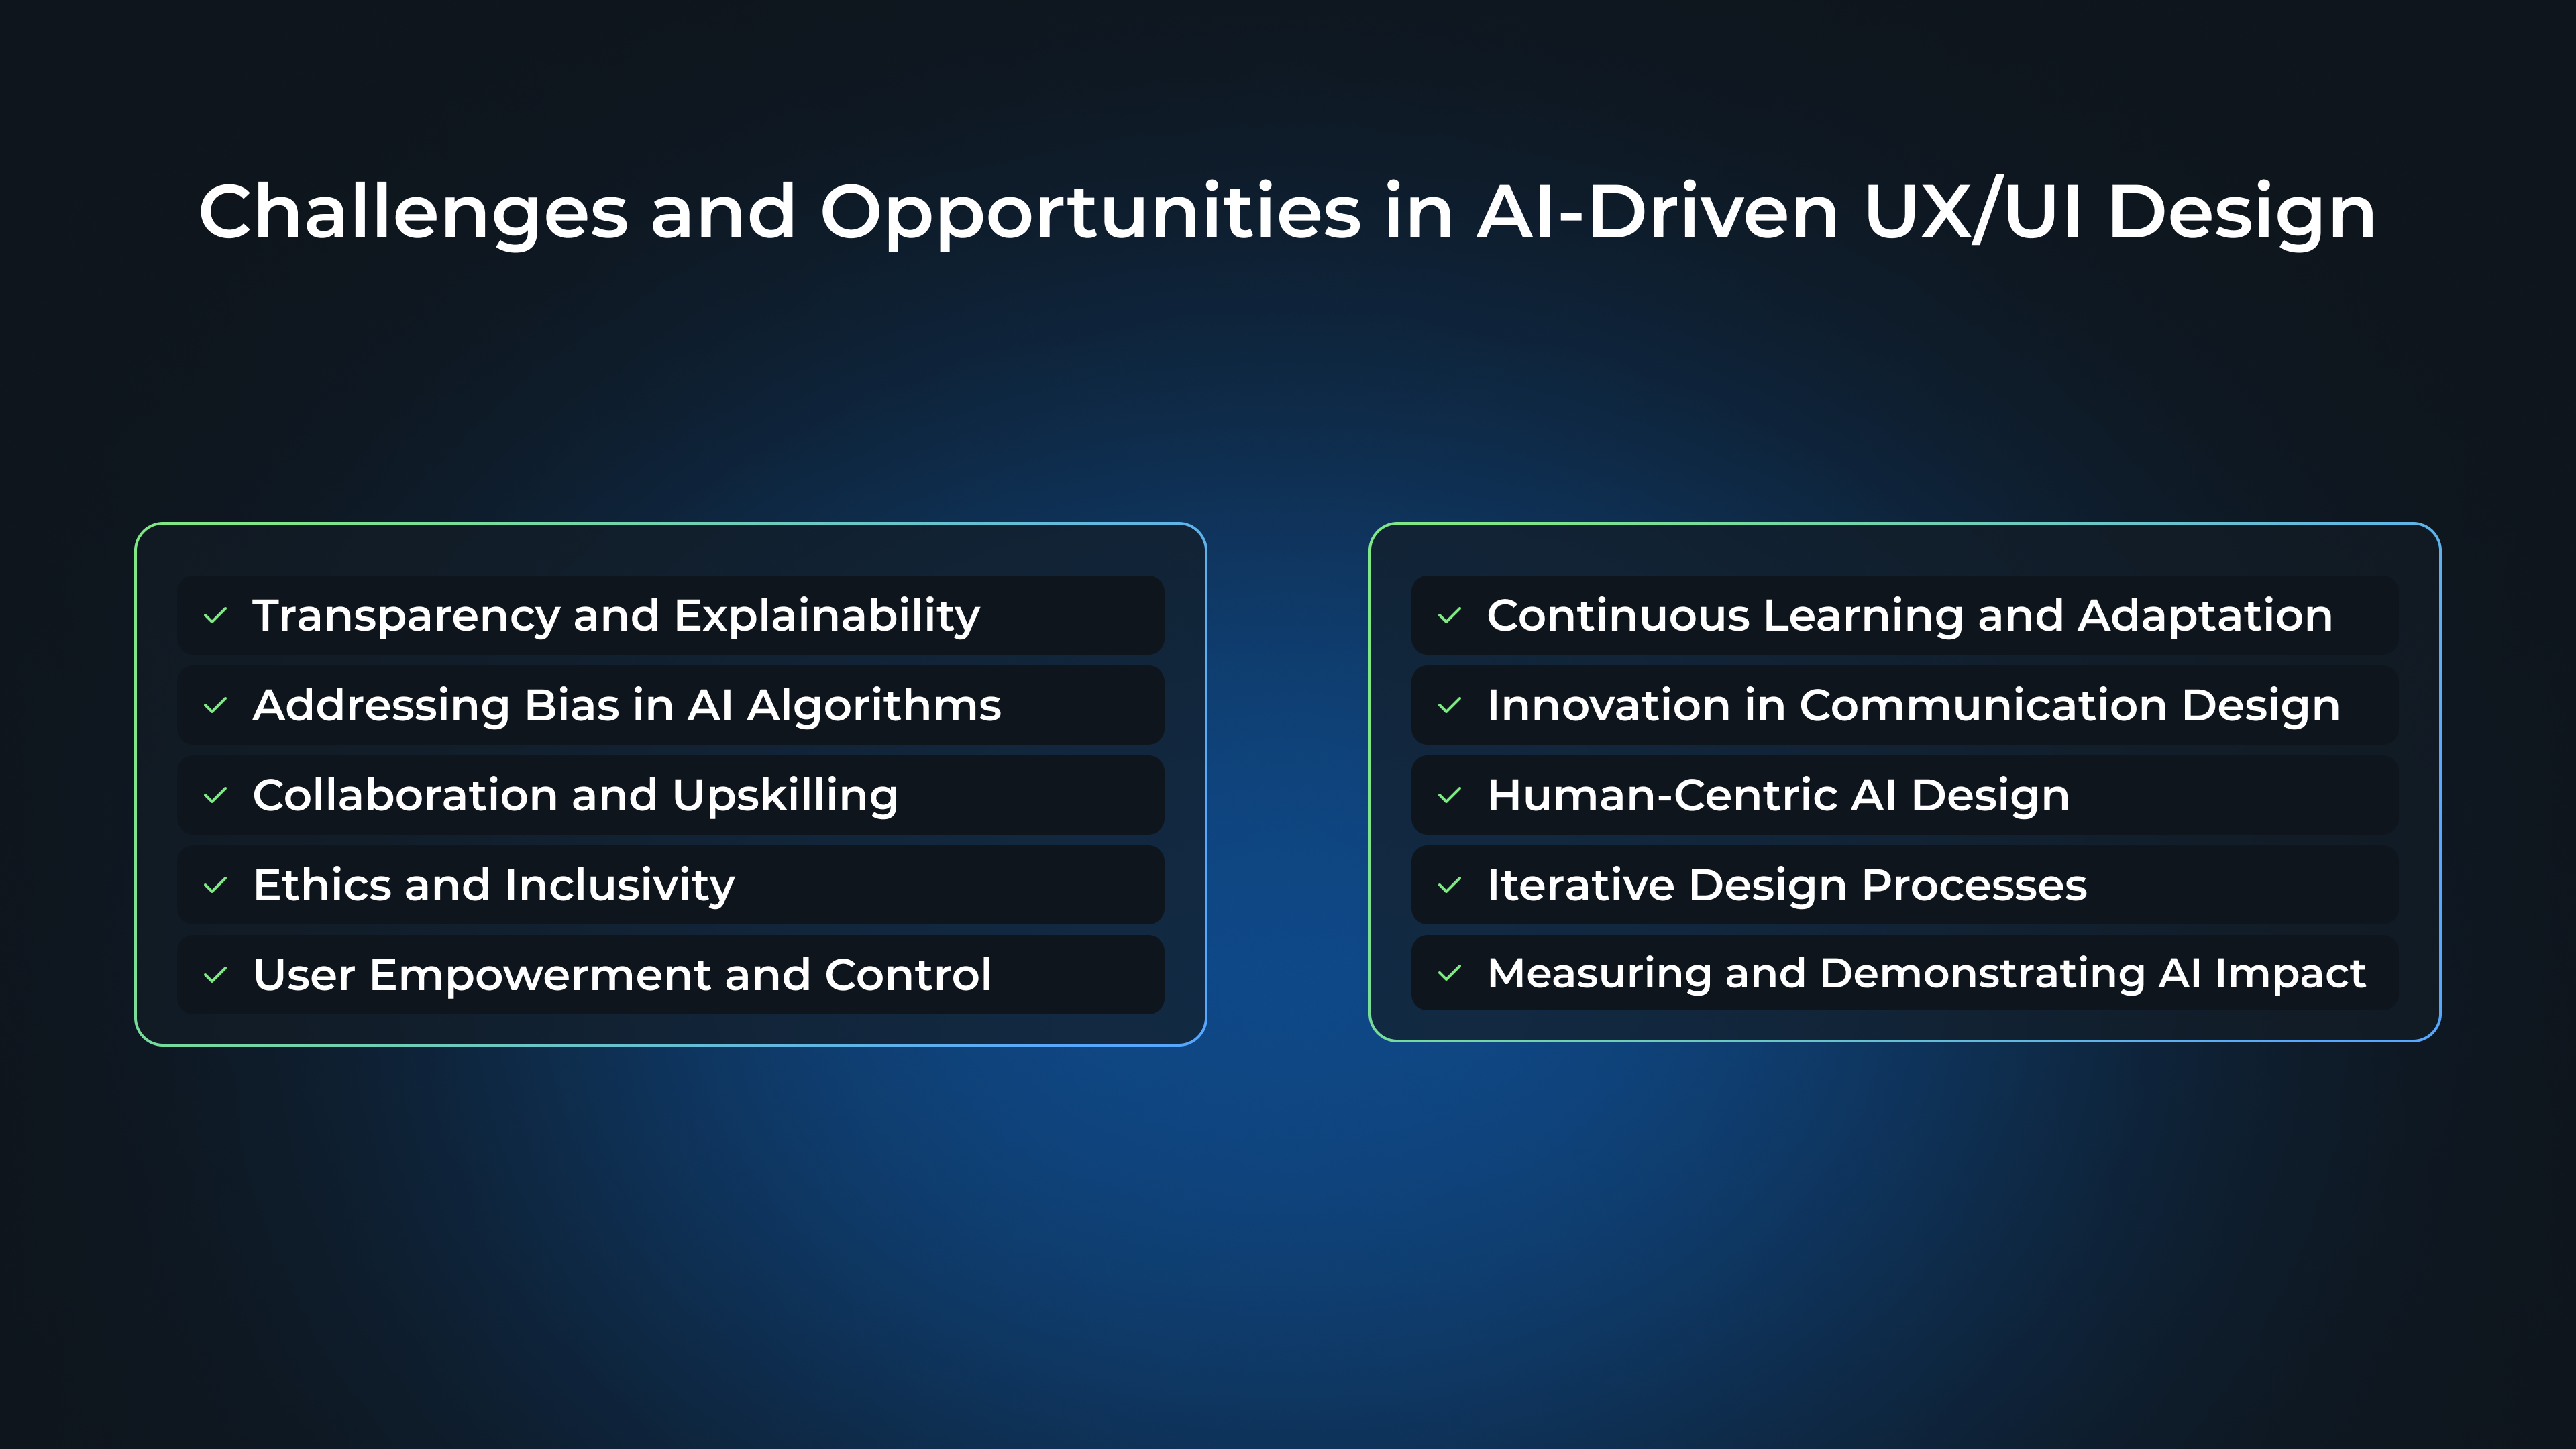 Challenges and Opportunities in AI-Driven UX/UI Design:
Transparency and Explainability
Addressing Bias in AI Algorithms
Collaboration and Upskilling
Ethics and Inclusivity
User Empowerment and Control
Continuous Learning and Adaptation
Innovation in Communication Design
Human-Centric AI Design
Iterative Design Processes
Measuring and Demonstrating AI Impact
